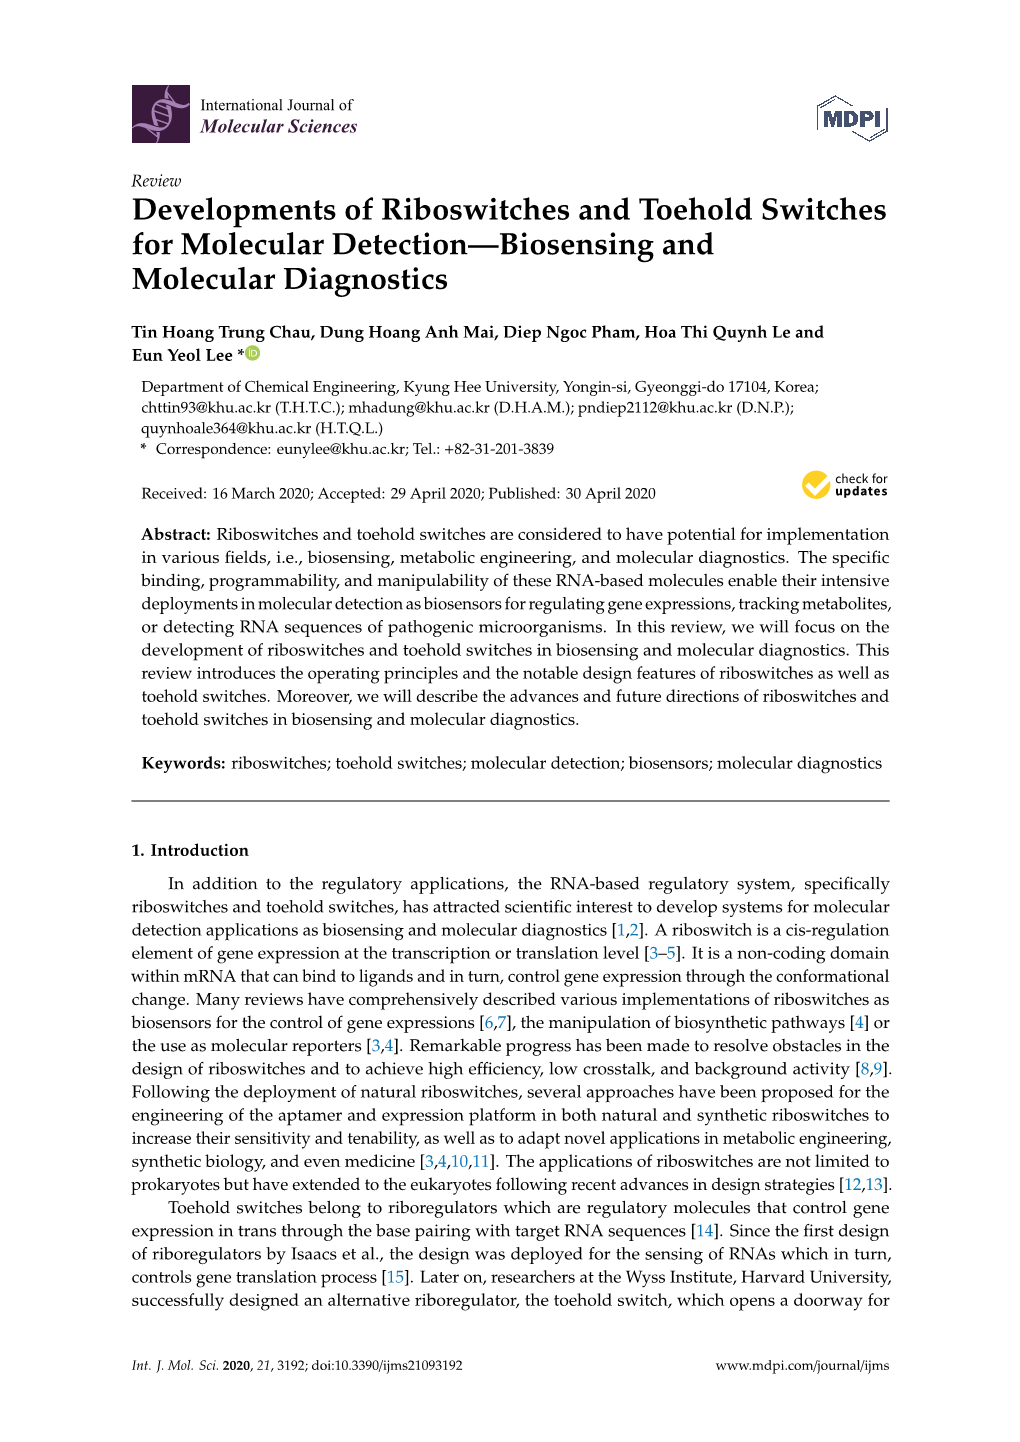 Developments of Riboswitches and Toehold Switches for Molecular Detection—Biosensing and Molecular Diagnostics